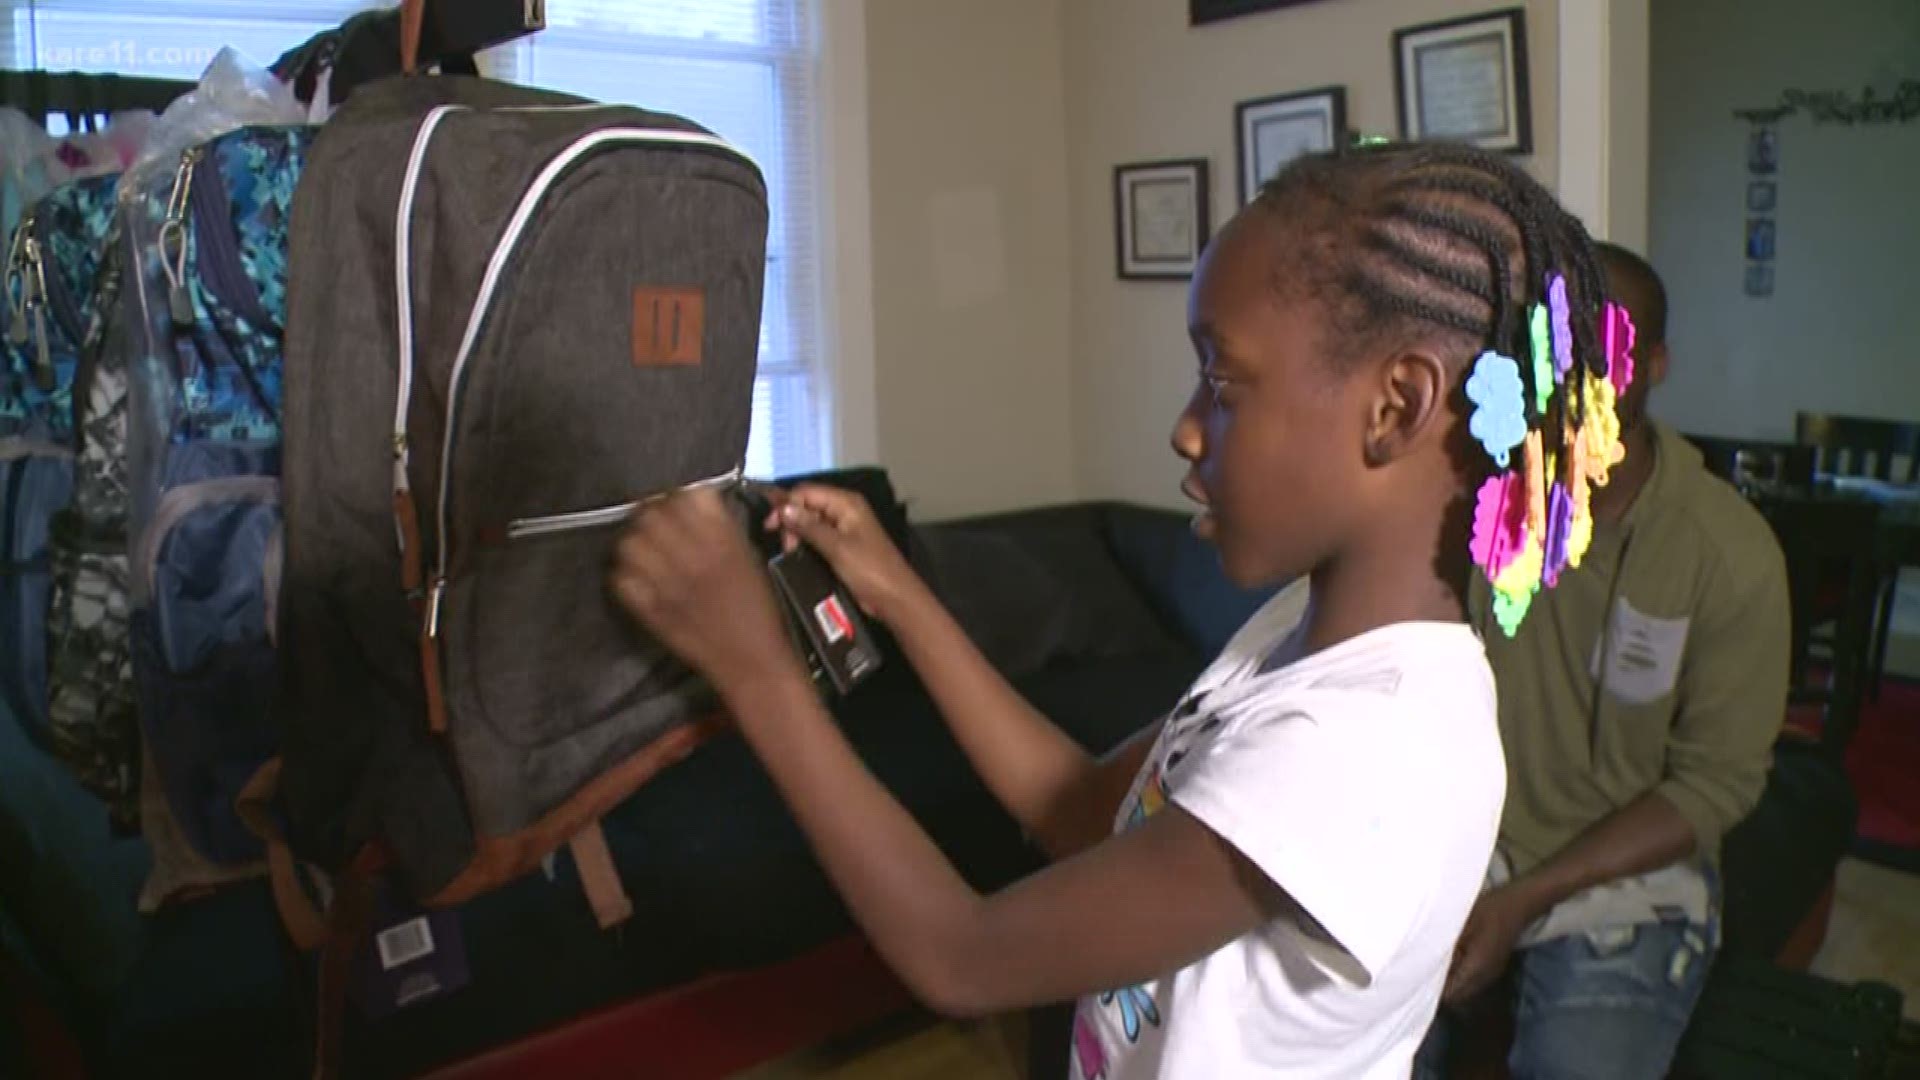 A north Minneapolis family's back-to-school business is just getting off the ground... and it's all inspired by a 9-year-old. She takes us behind the scenes of "Bags Well Packed." https://kare11.tv/2QfQVlT